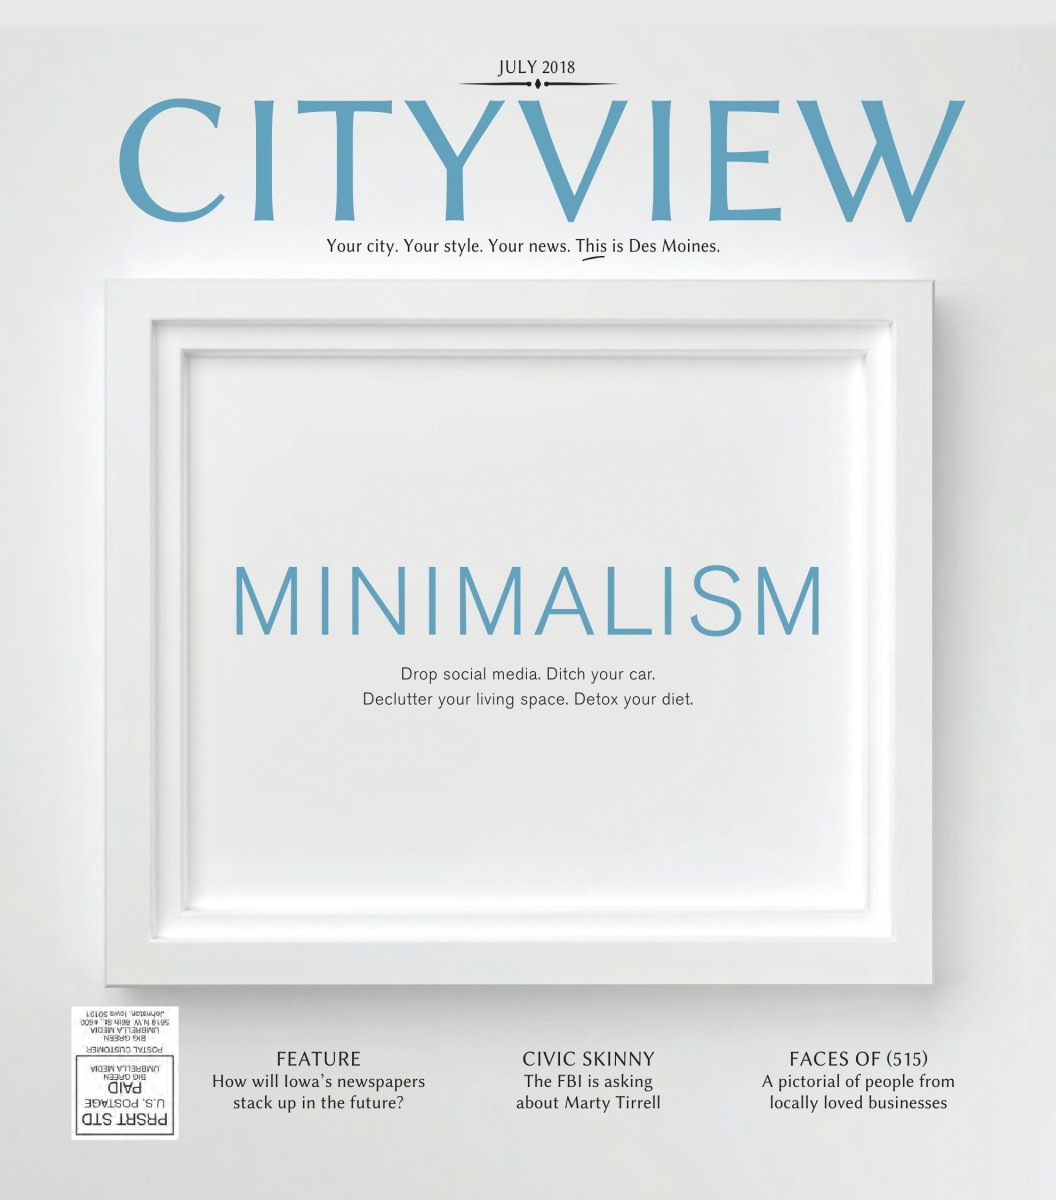 http://www.dmcityview.com/CityviewJuly2018/files/pages/tablet/1.jpg